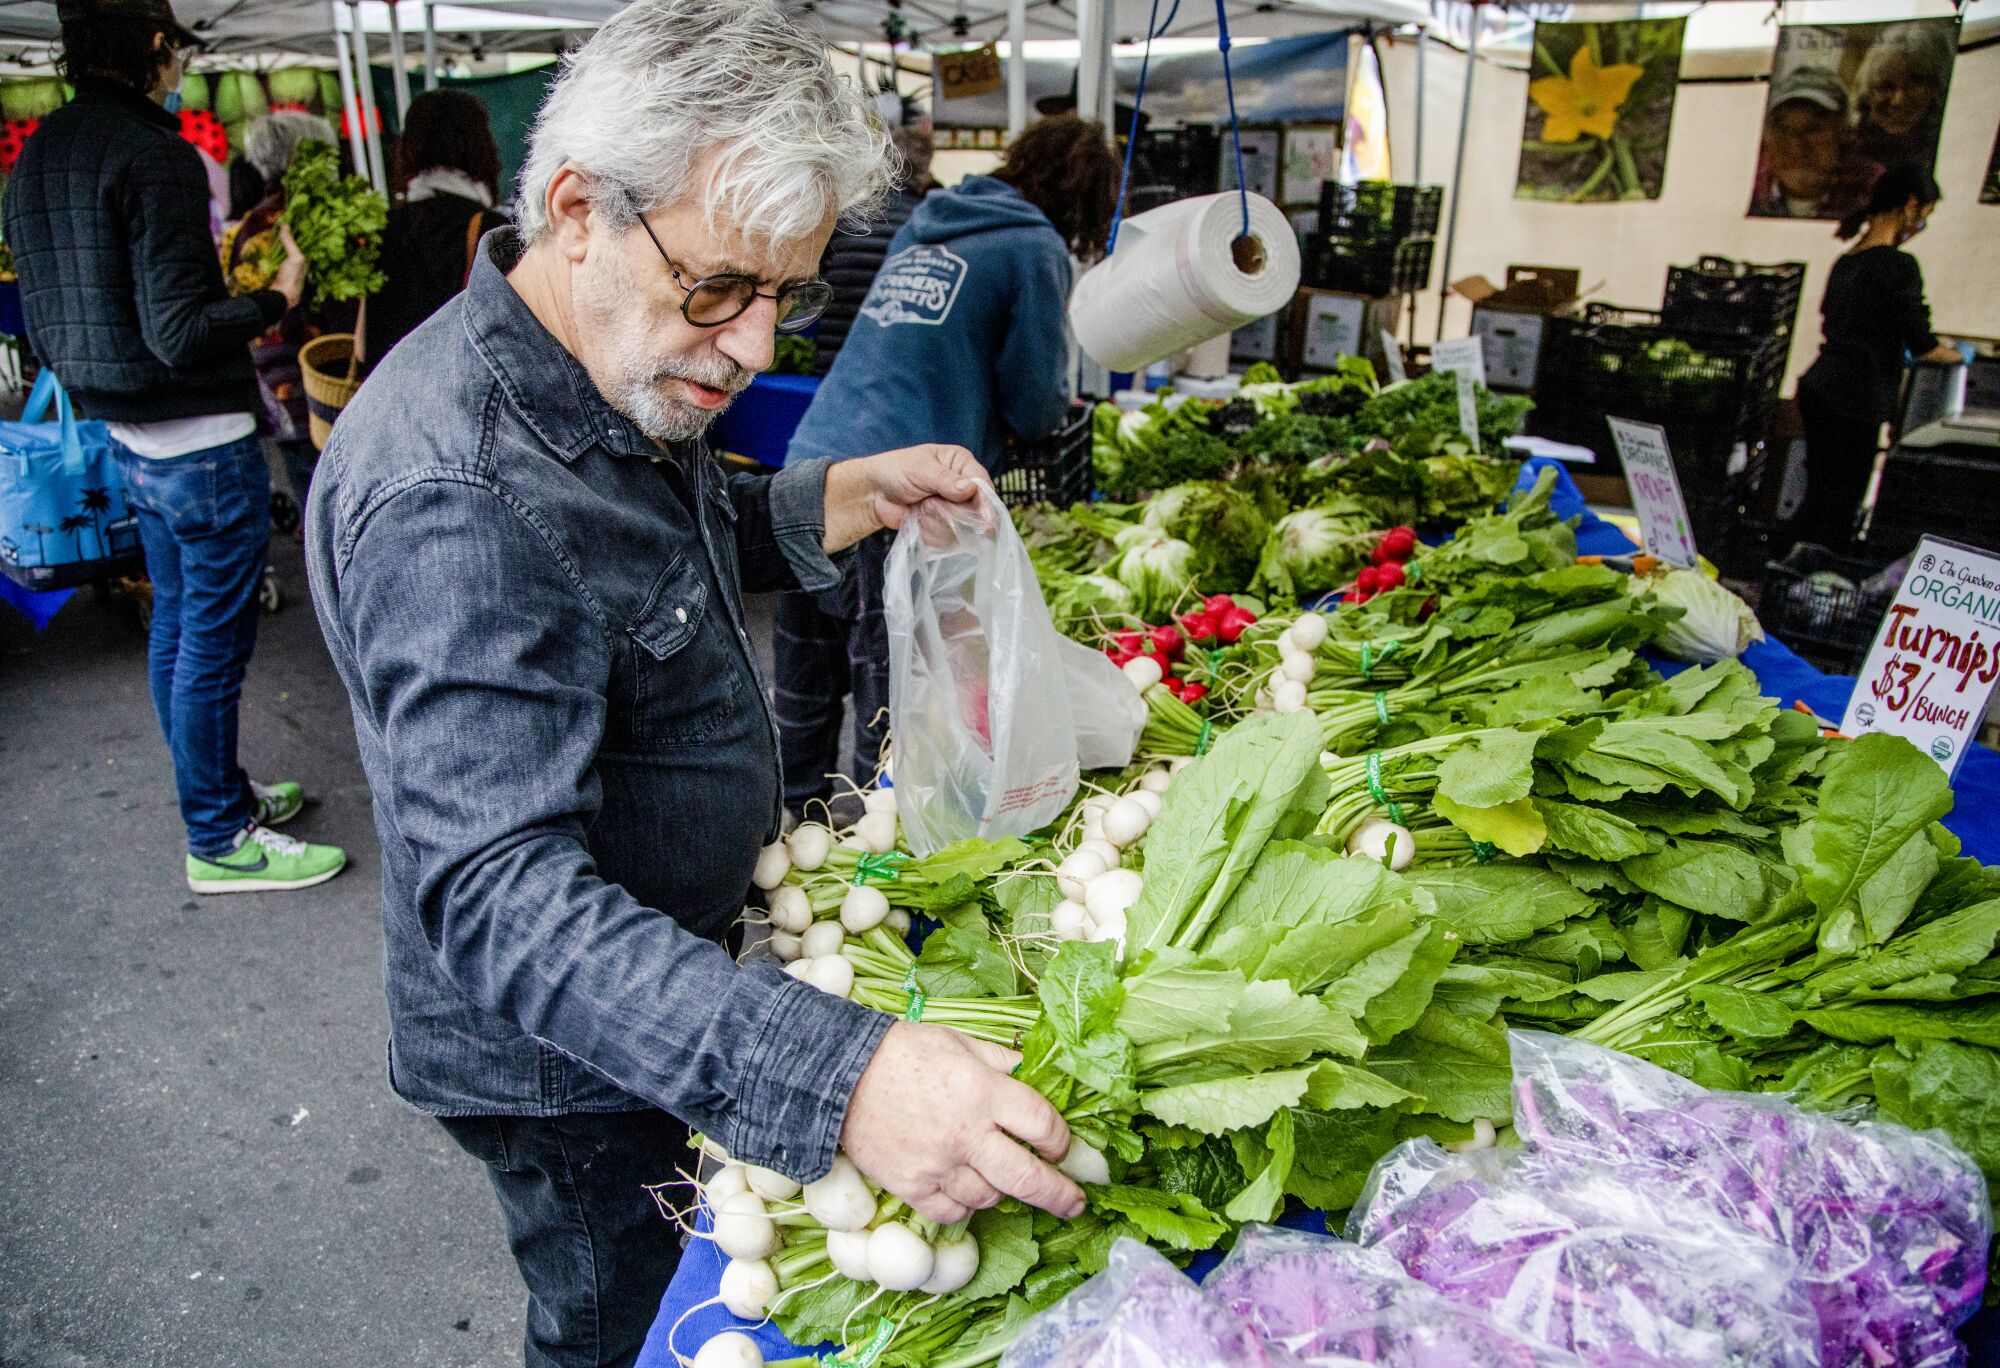 A man in round glasses picks vegetables at a farmers market.